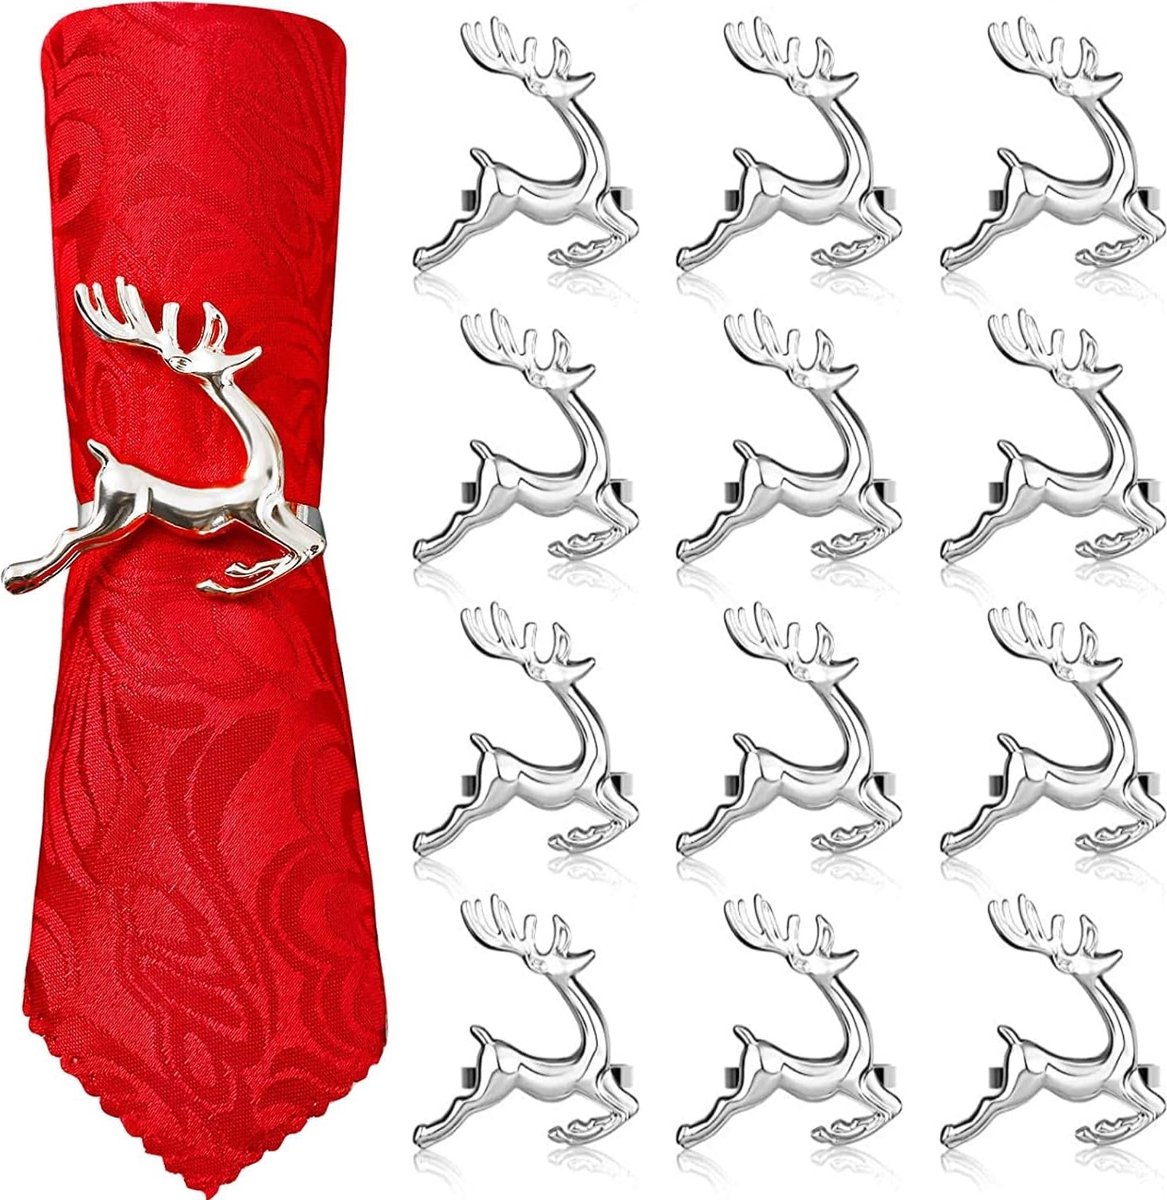 Pack of 12 Christmas Reindeer Napkin Rings, 6 cm Silver Deer Napkin Holder, Reindeer Napkin Buckle for Christmas, Lunch, Thanksgiving Party, Holiday, Wedding, Table Decoration - Merkloos